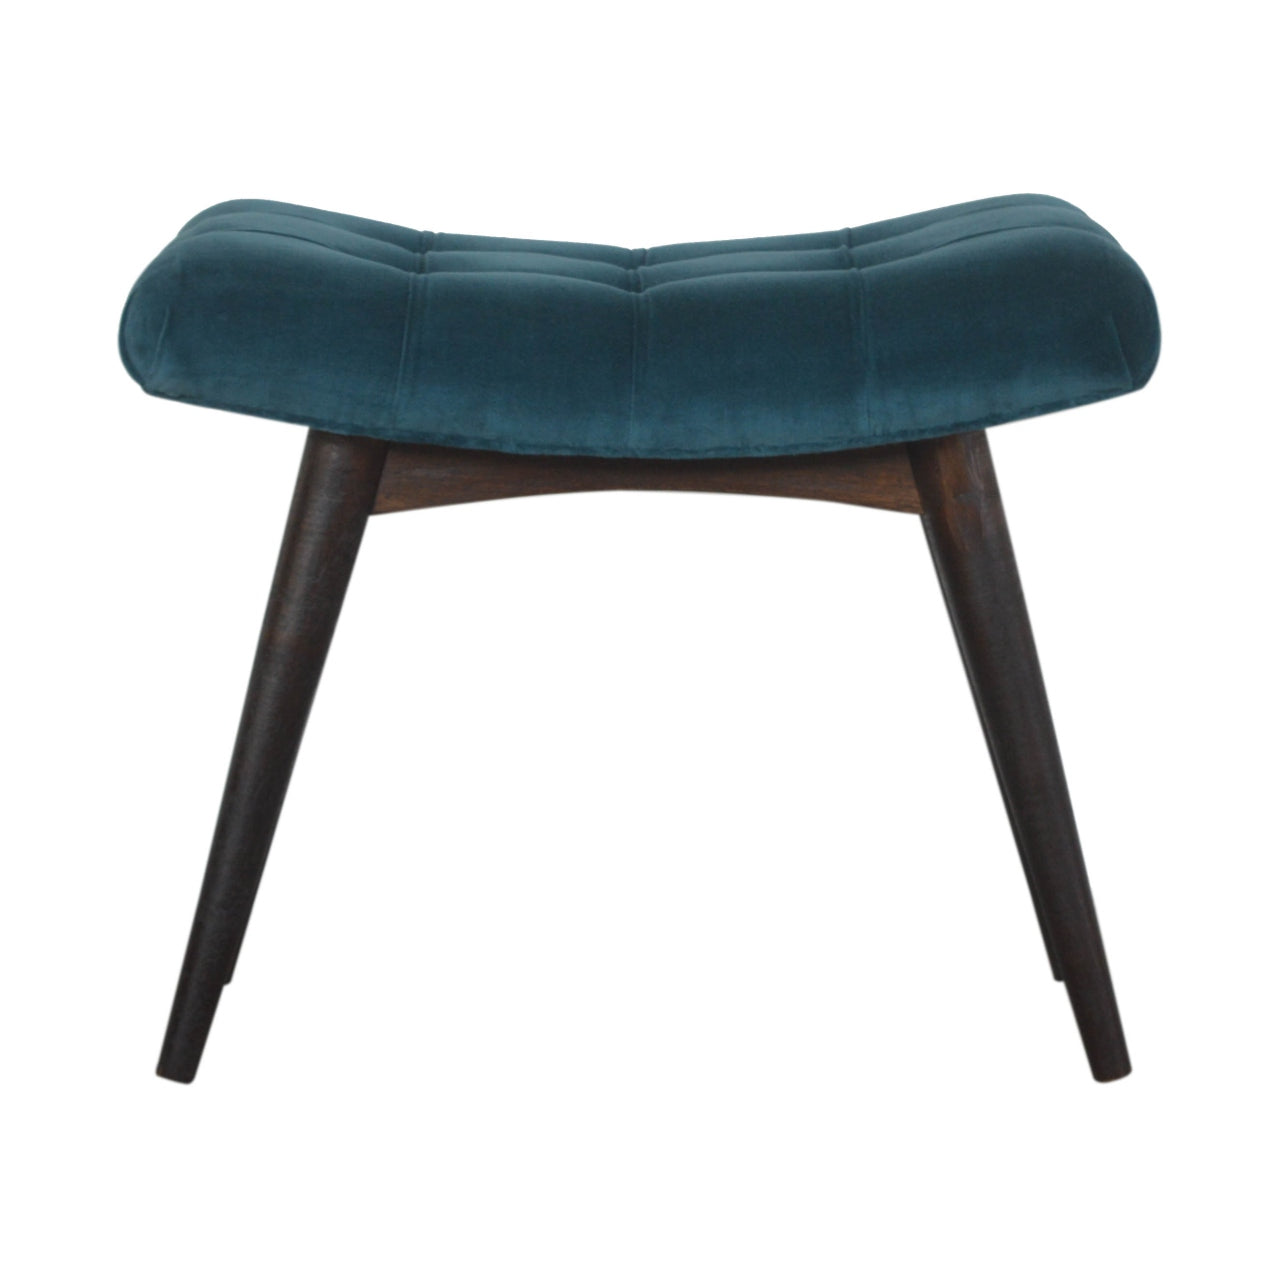 View Teal Cotton Velvet Curved Bench information